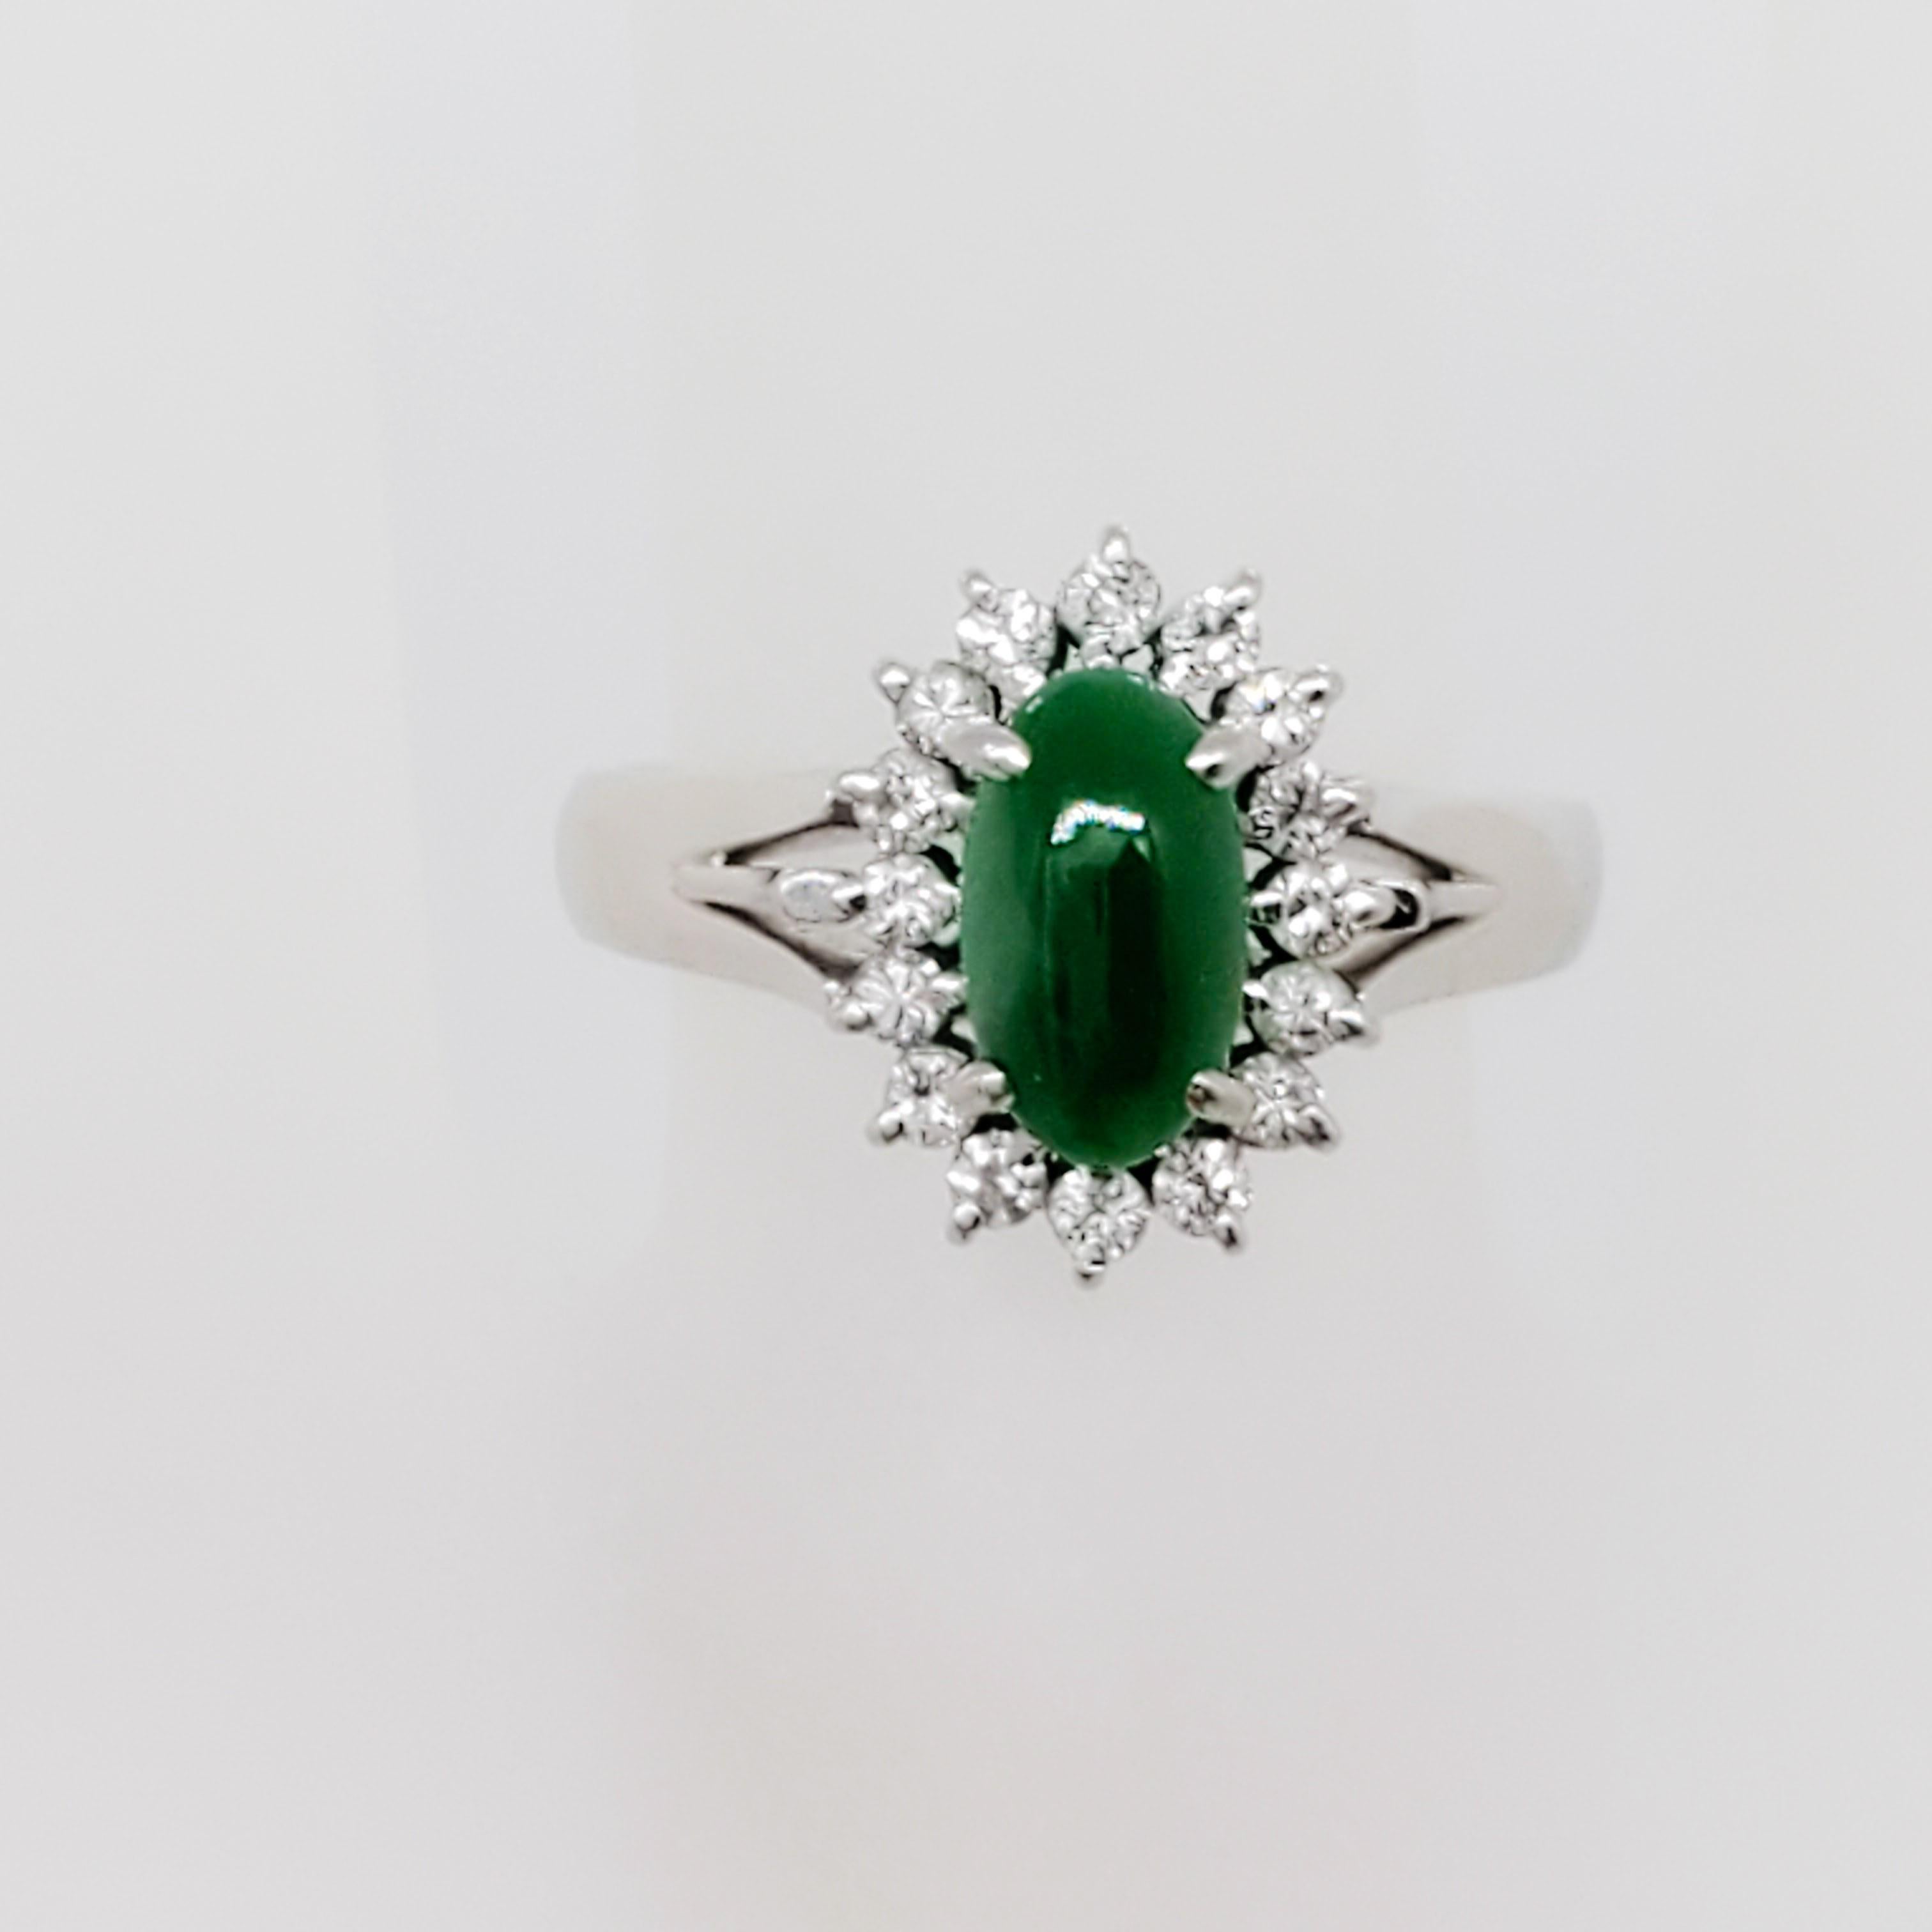 Women's or Men's Green Jade Oval Cabochon and White Diamond Cluster Ring in Platinum